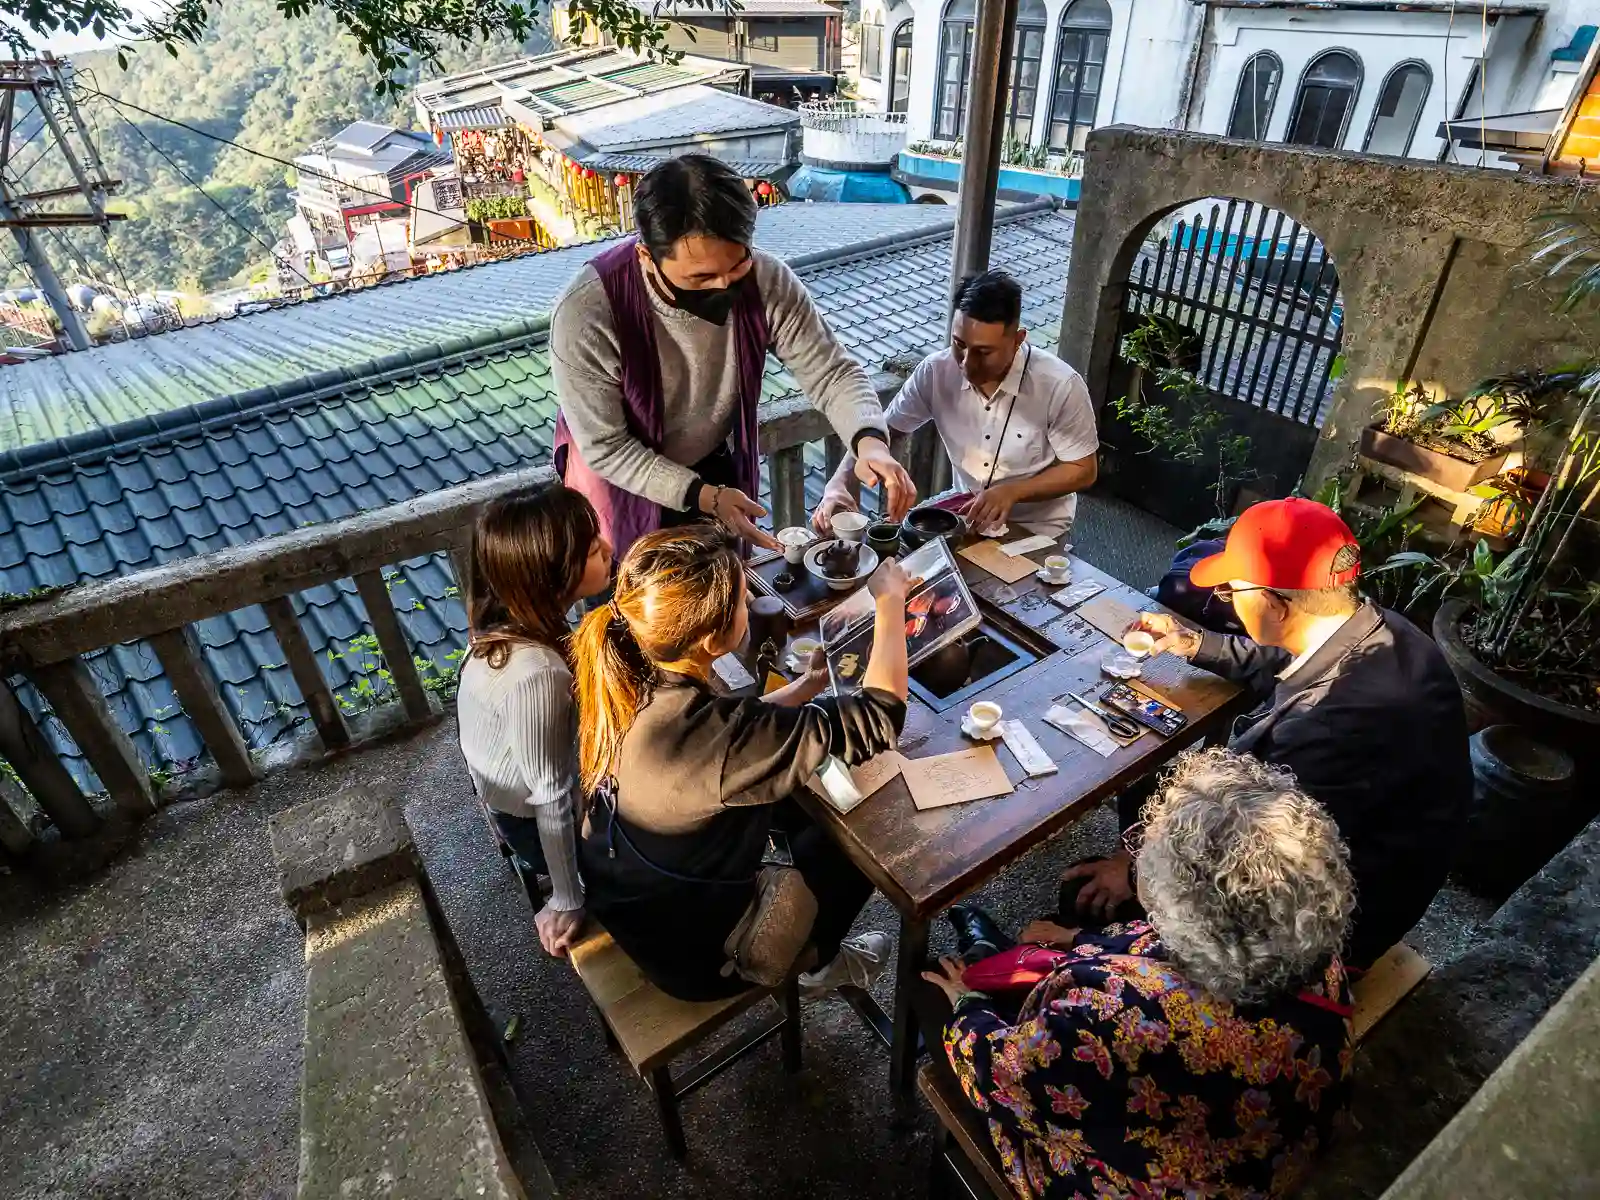 A group of guests brews tea in the outside seating area of Jiufen Tea House.